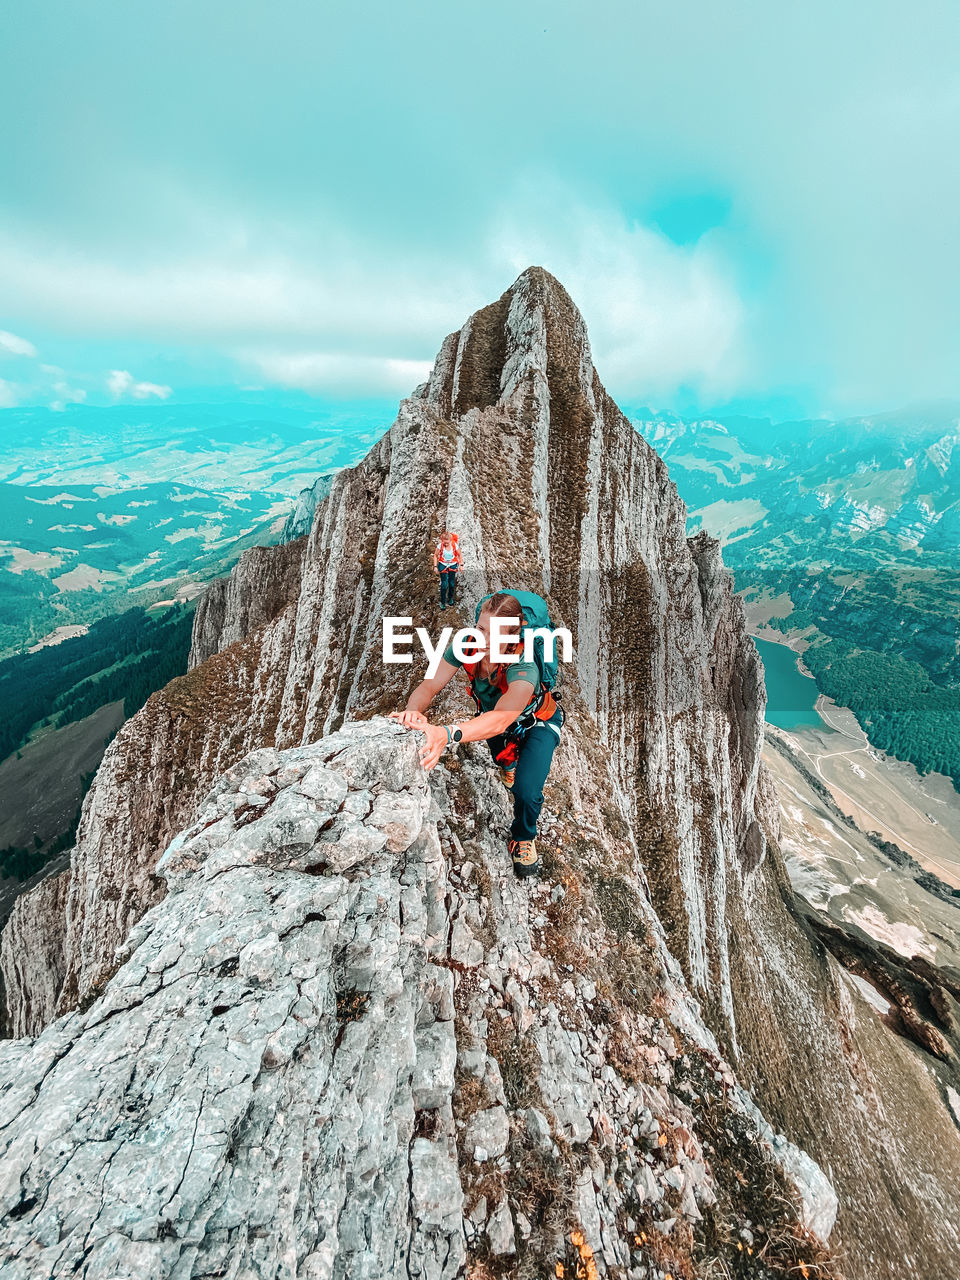 MAN STANDING ON ROCK AGAINST MOUNTAINS